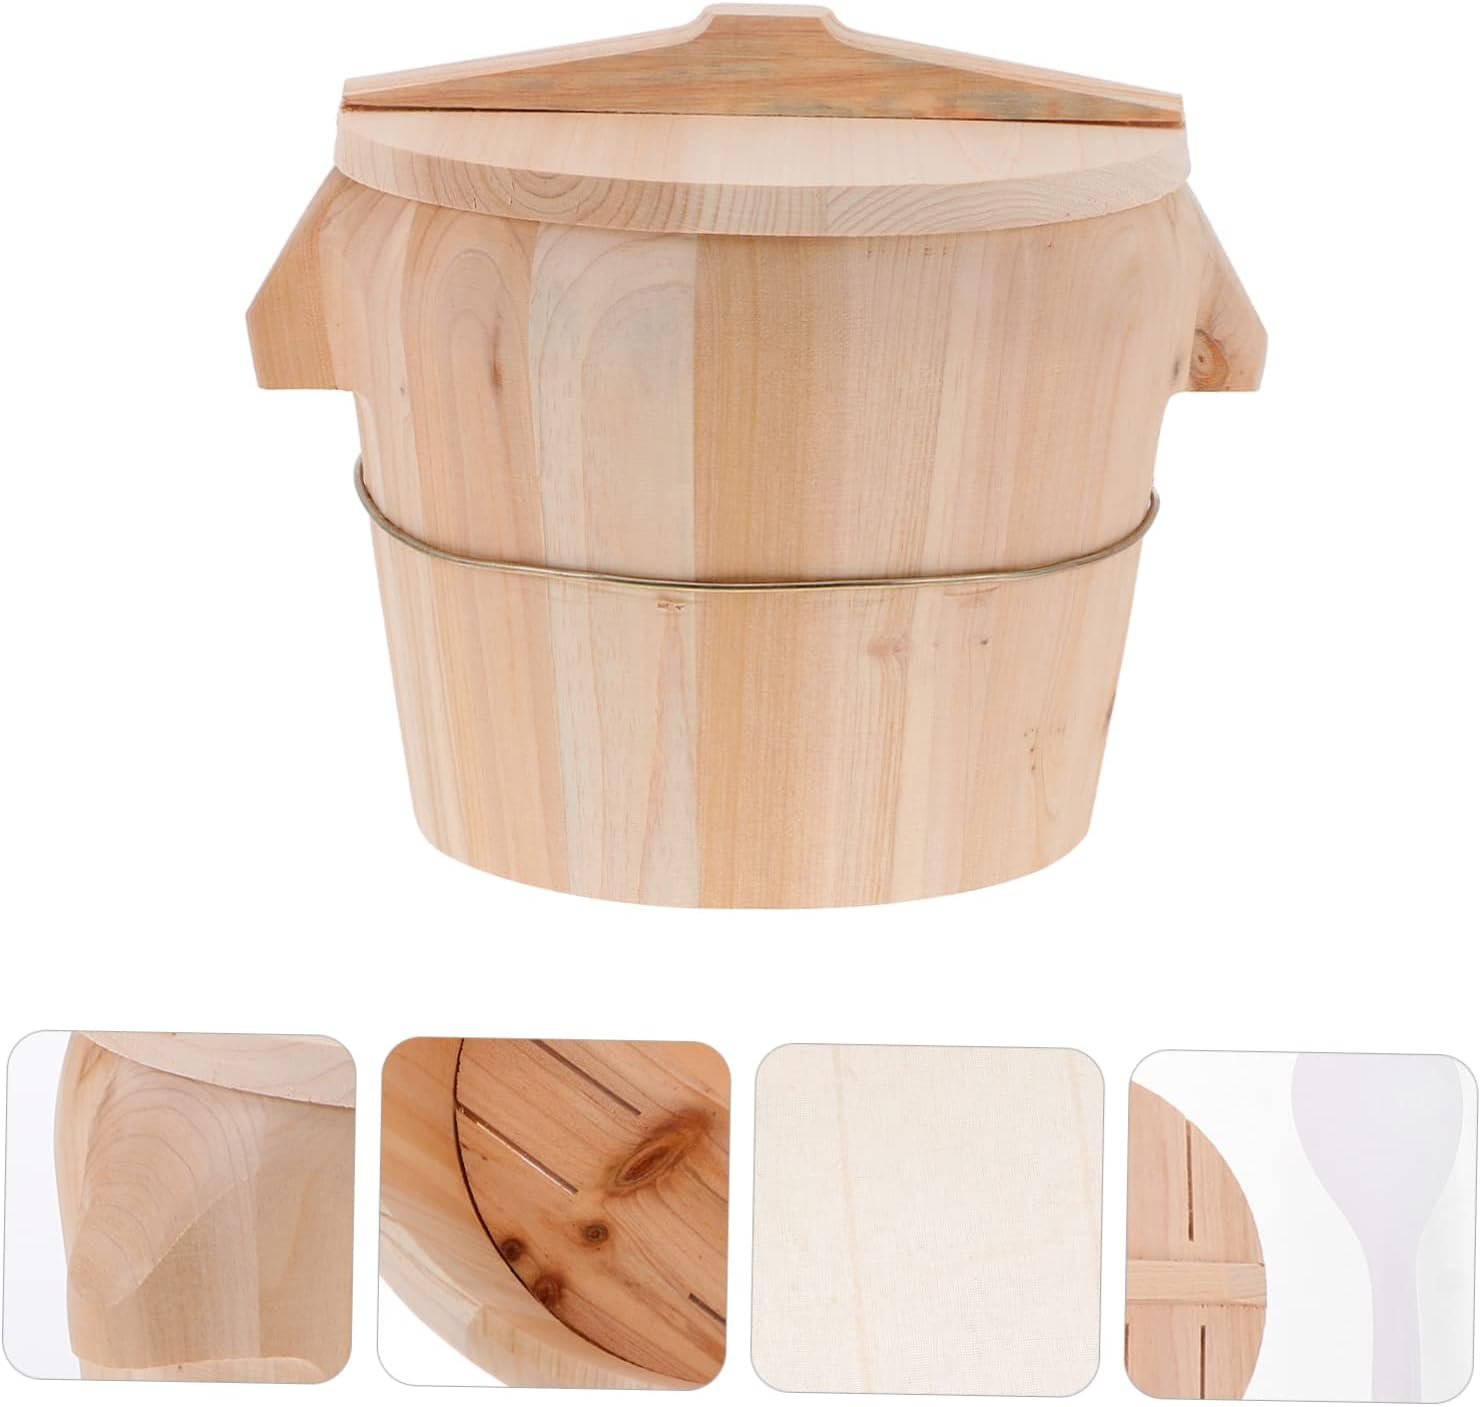 OKUMEYR 1set Rice Steamer Commercial Rice Cooker Rice Cereal Asian Rice Cooker Sushi Rice Wooden Bowl Rice Cooking Steamer Asian Rice Steamer Pot Kitchen Gadget Chic Rice Steamer Household